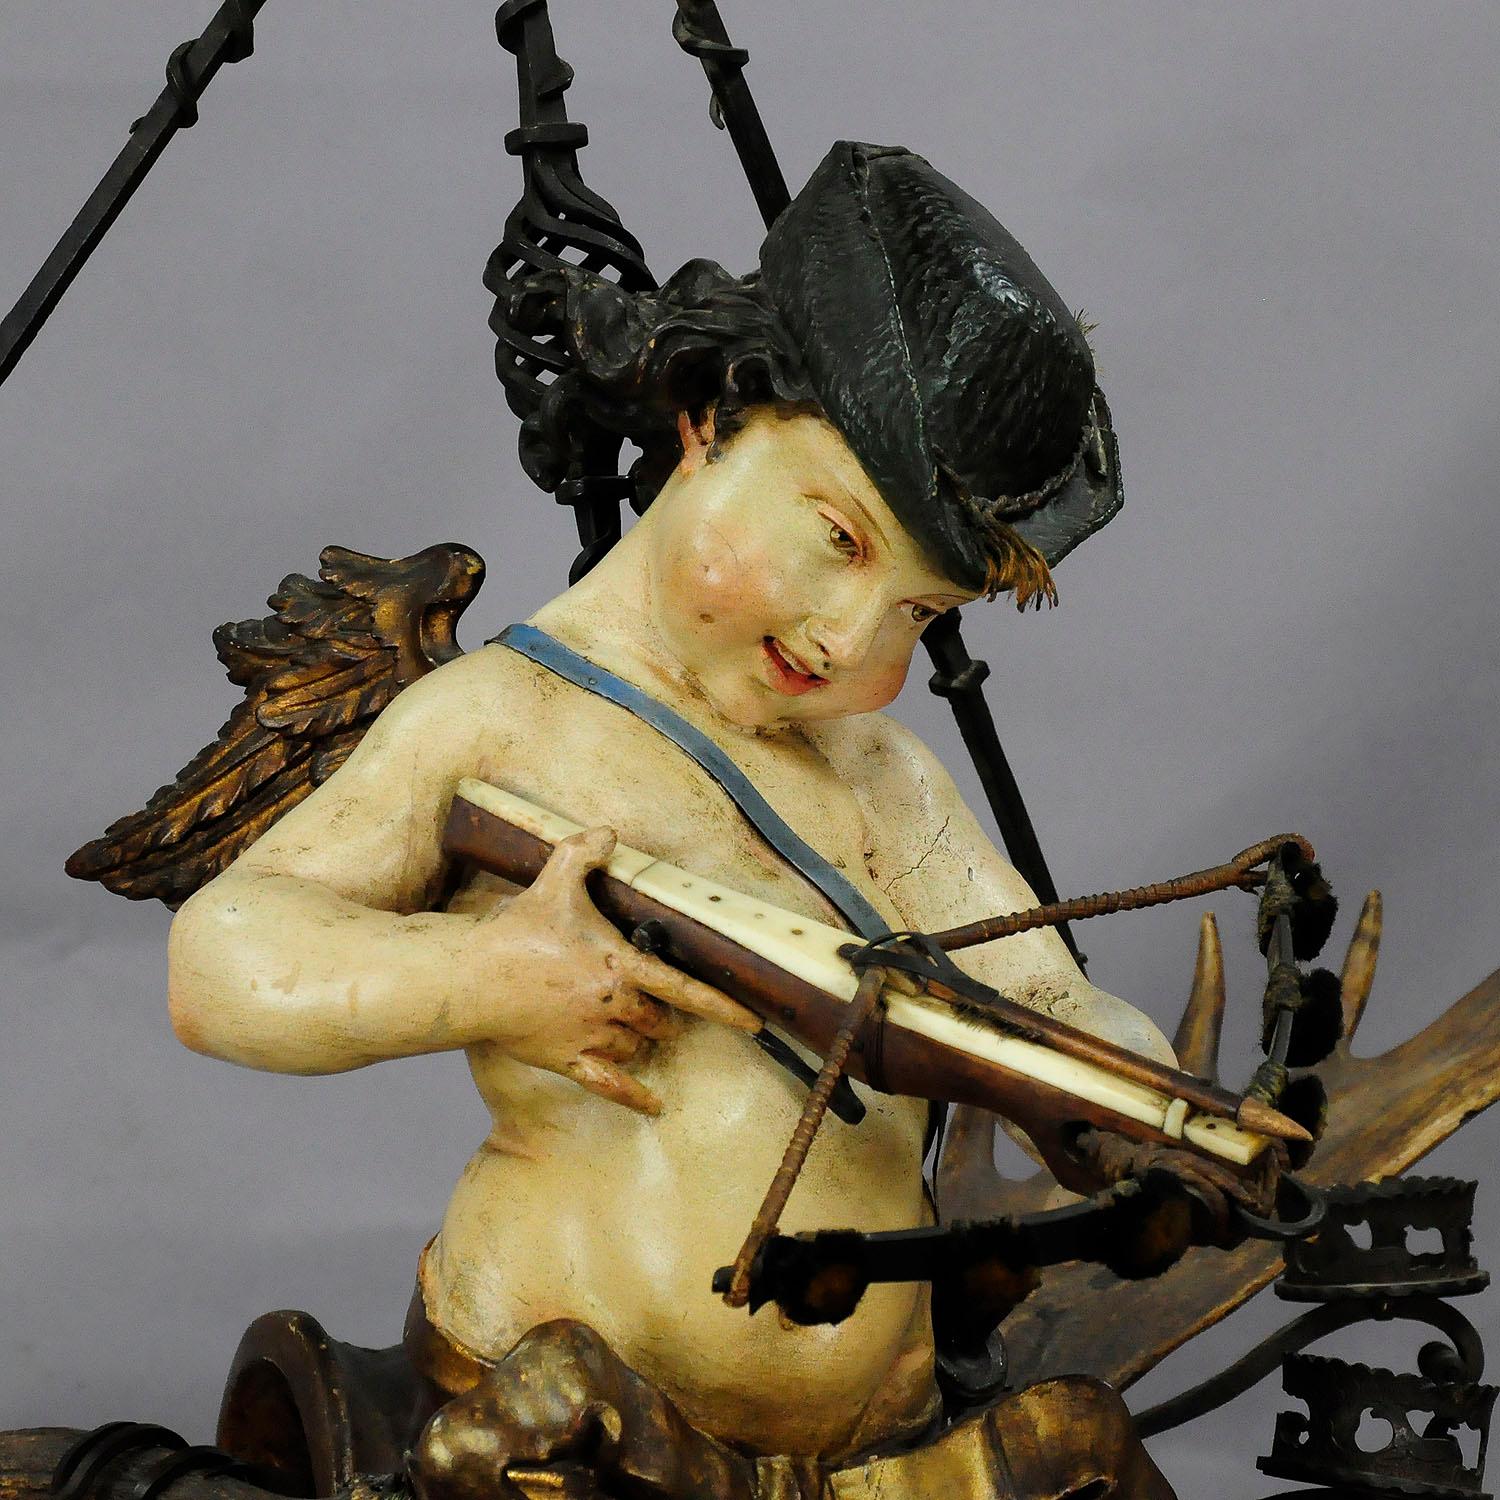 An unique and rare antique antler chandelier - a wooden hand carved and painted statue of an angel of love as hunter with crossbow fixed on an impressive pair of original fallow deer antlers executed circa 1880. Executed with several splendid